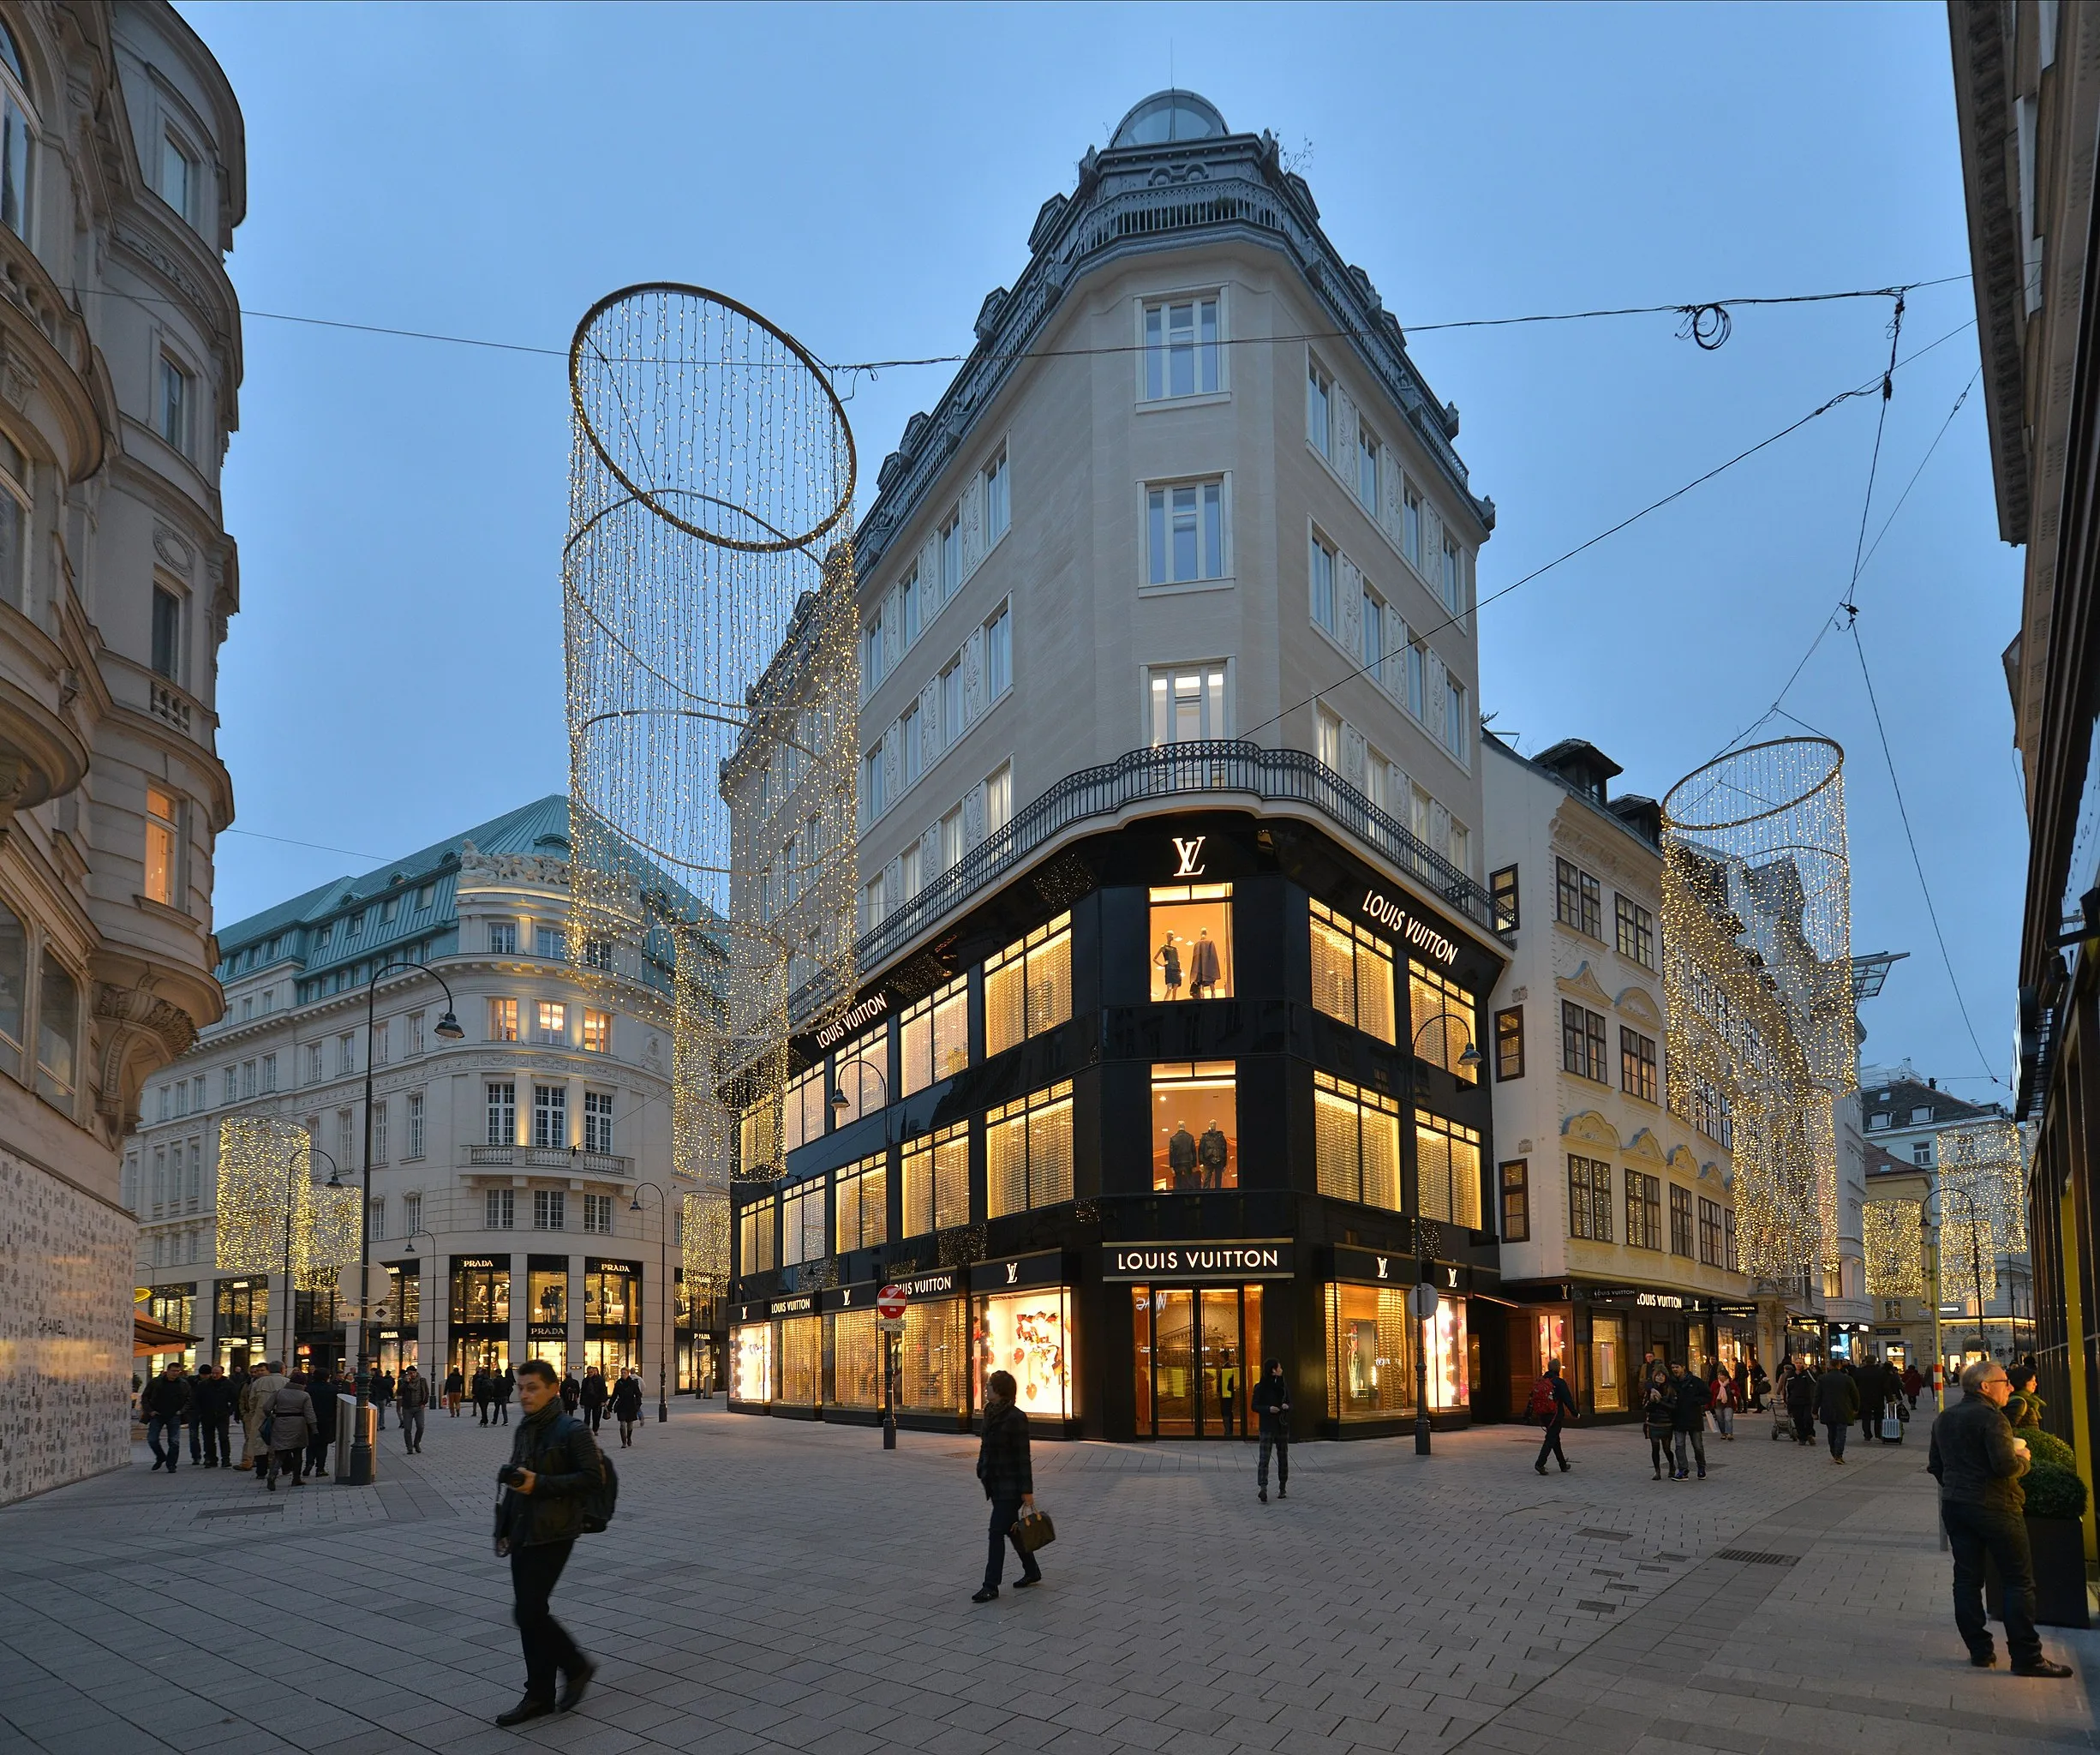 Goldenes Quartier in Austria, europe | Fragrance,Handbags,Shoes,Accessories,Clothes,Watches - Country Helper